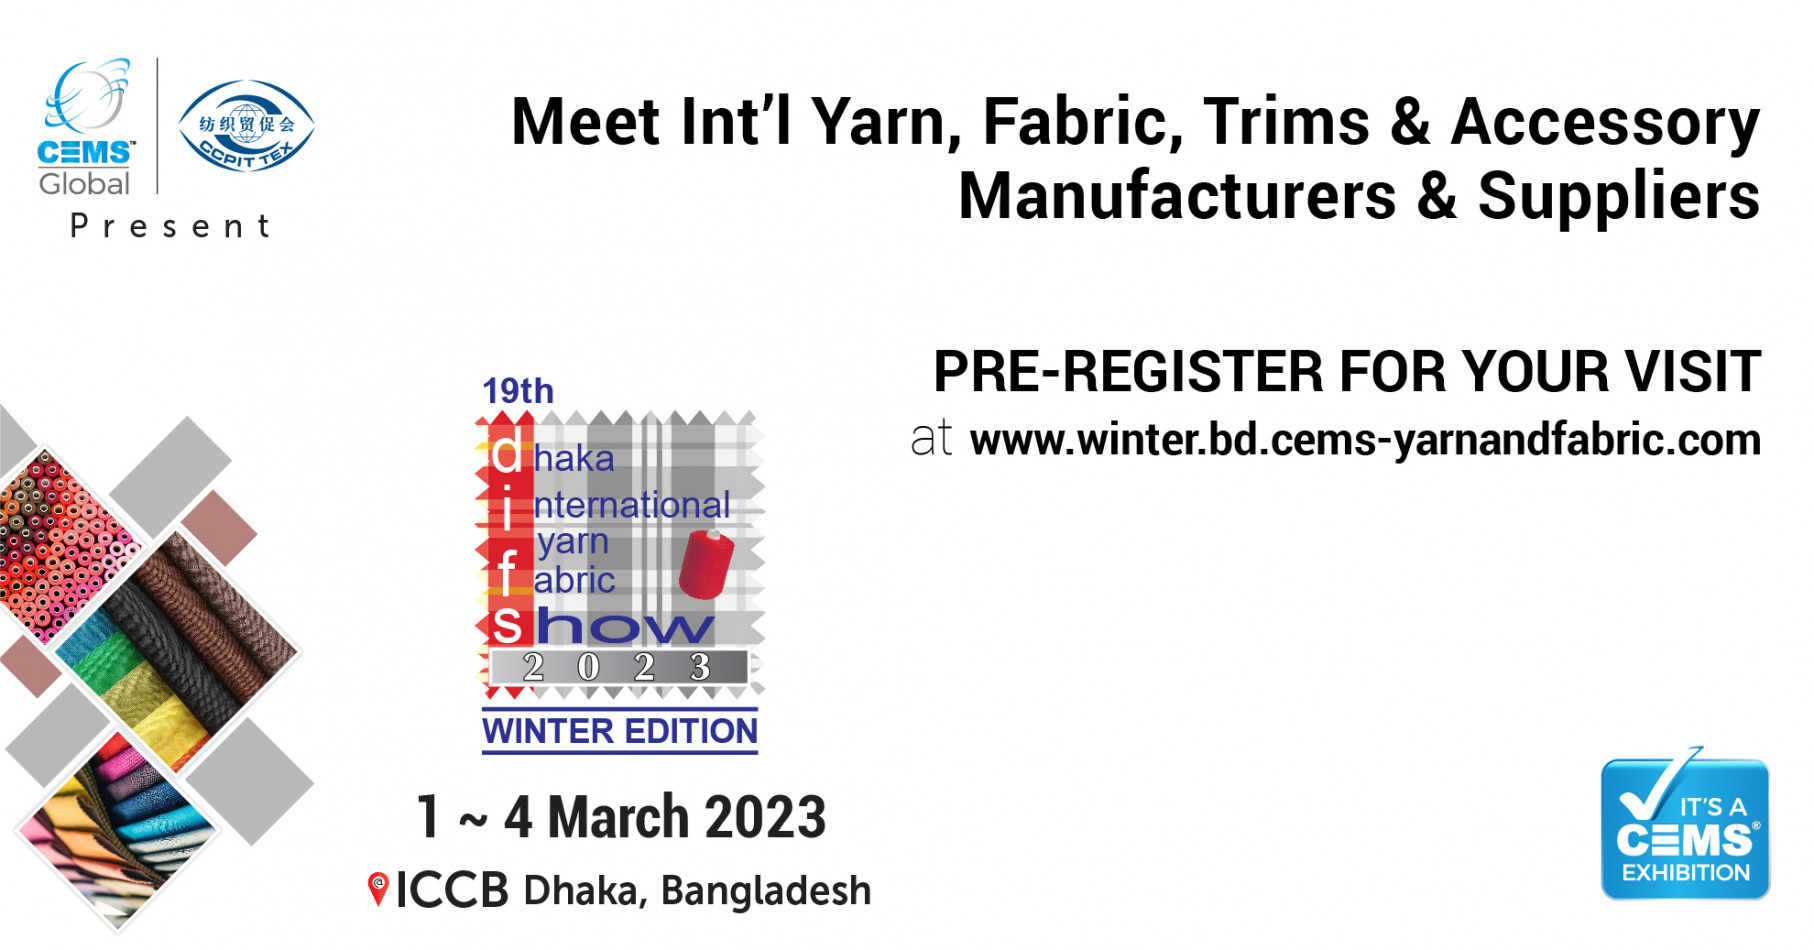 CEMS-Global USA & CCPIT-Tex China to organize the 19th Dhaka Int'l Yarn & Fabric Show 2023 in Bangladesh from 1 ~ 4 March 2023